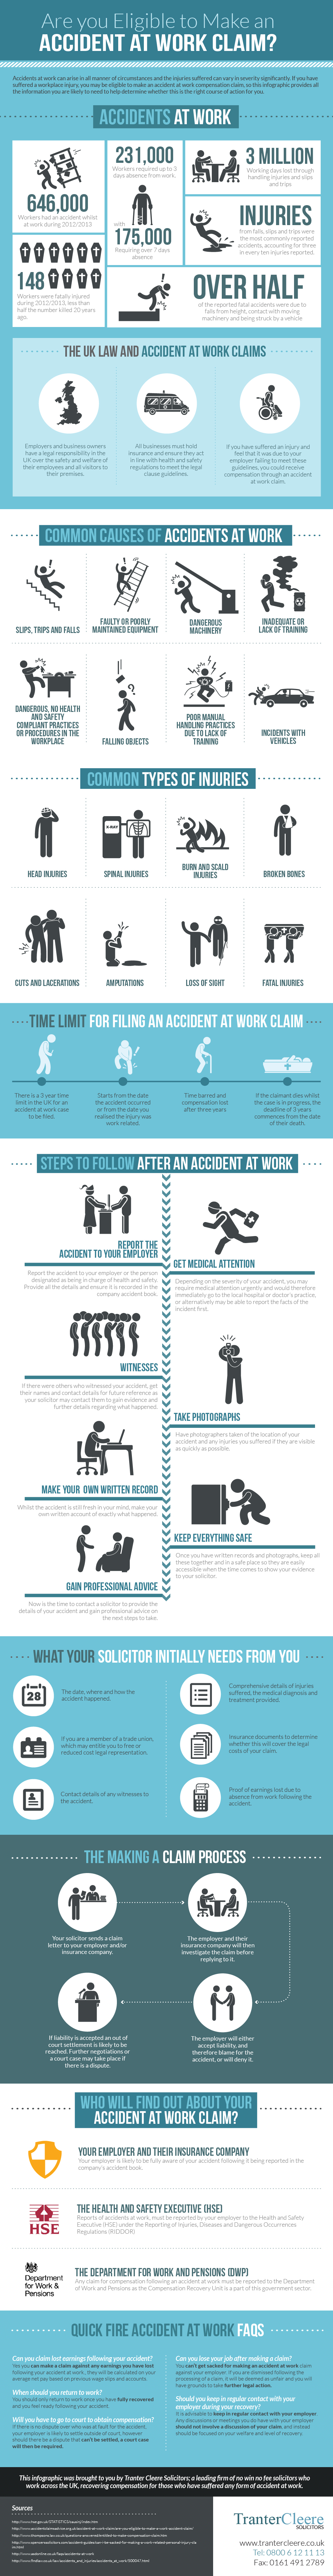 Are-You-Eligible-to-Make-an-Accident-at-Work-Claim-Infographic